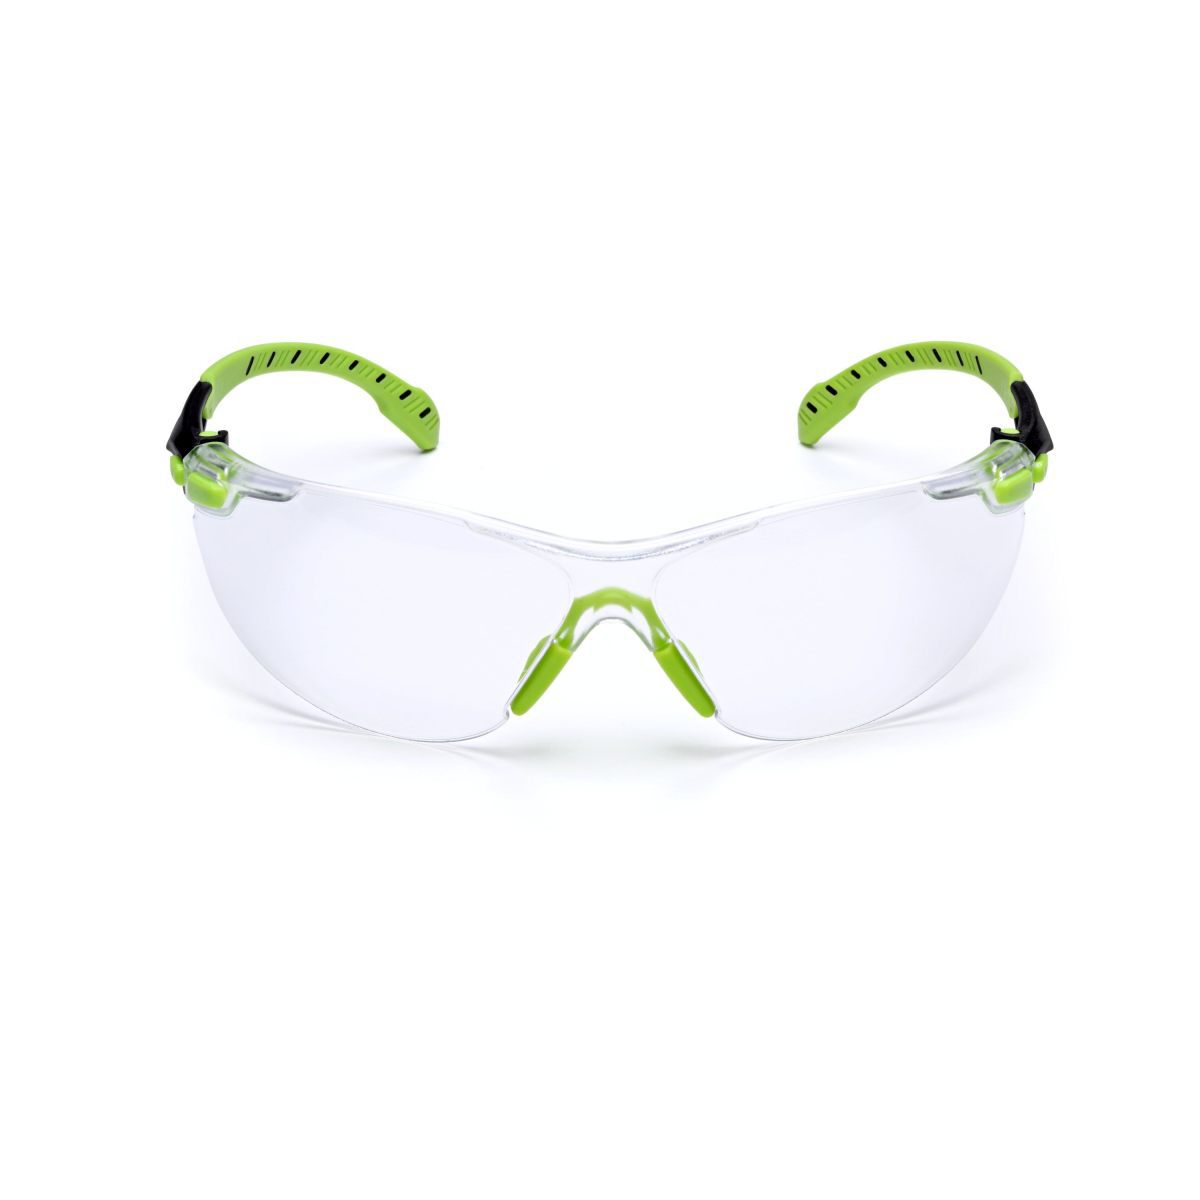 3M™ Solus™ 1000-Series Safety Glasses S1201SGAF, Green/Black, Clear Scotchgard™ Anti-Fog Lens (Availability restrictions apply.)